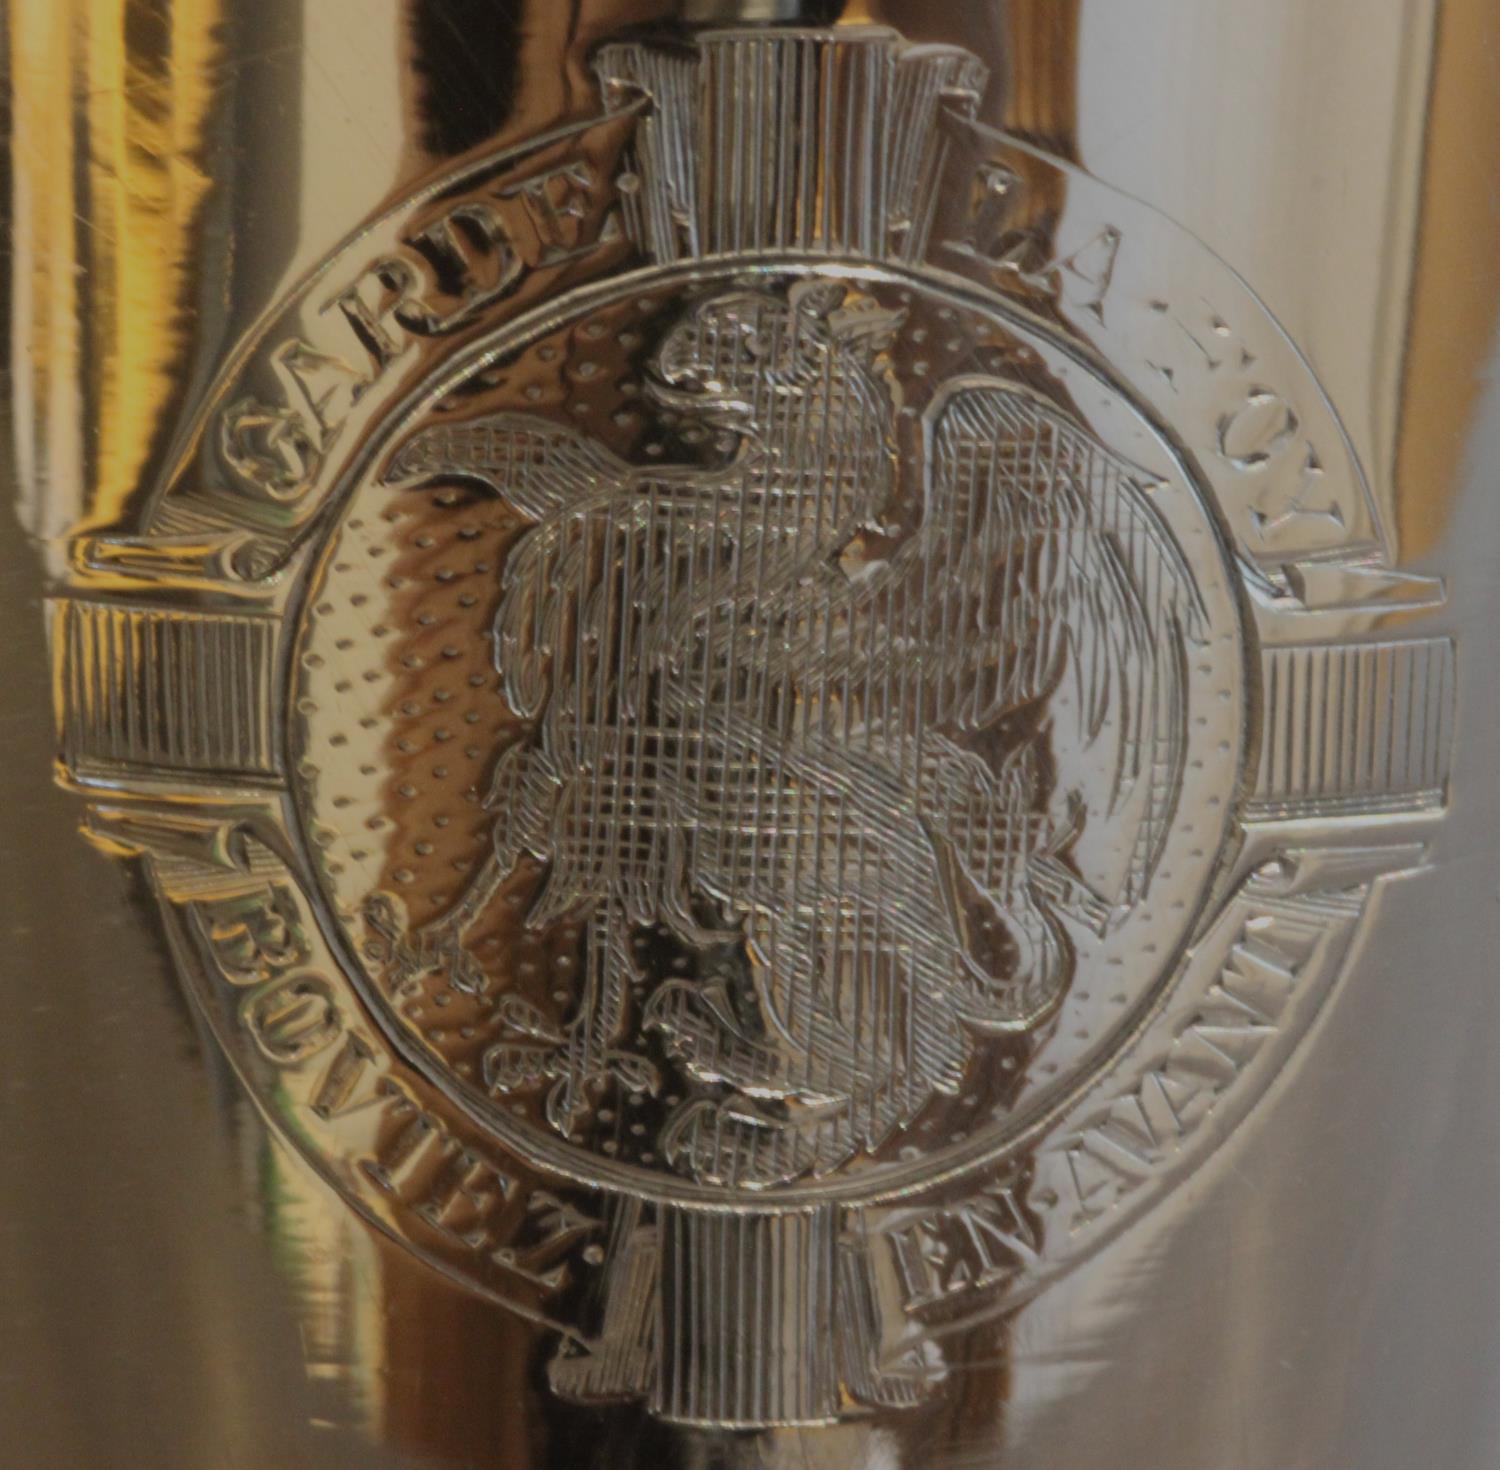 Leather cased Set of 5 Silver plated graduated Beakers, Sir Charles Barry Family Crest and moto - Image 7 of 8